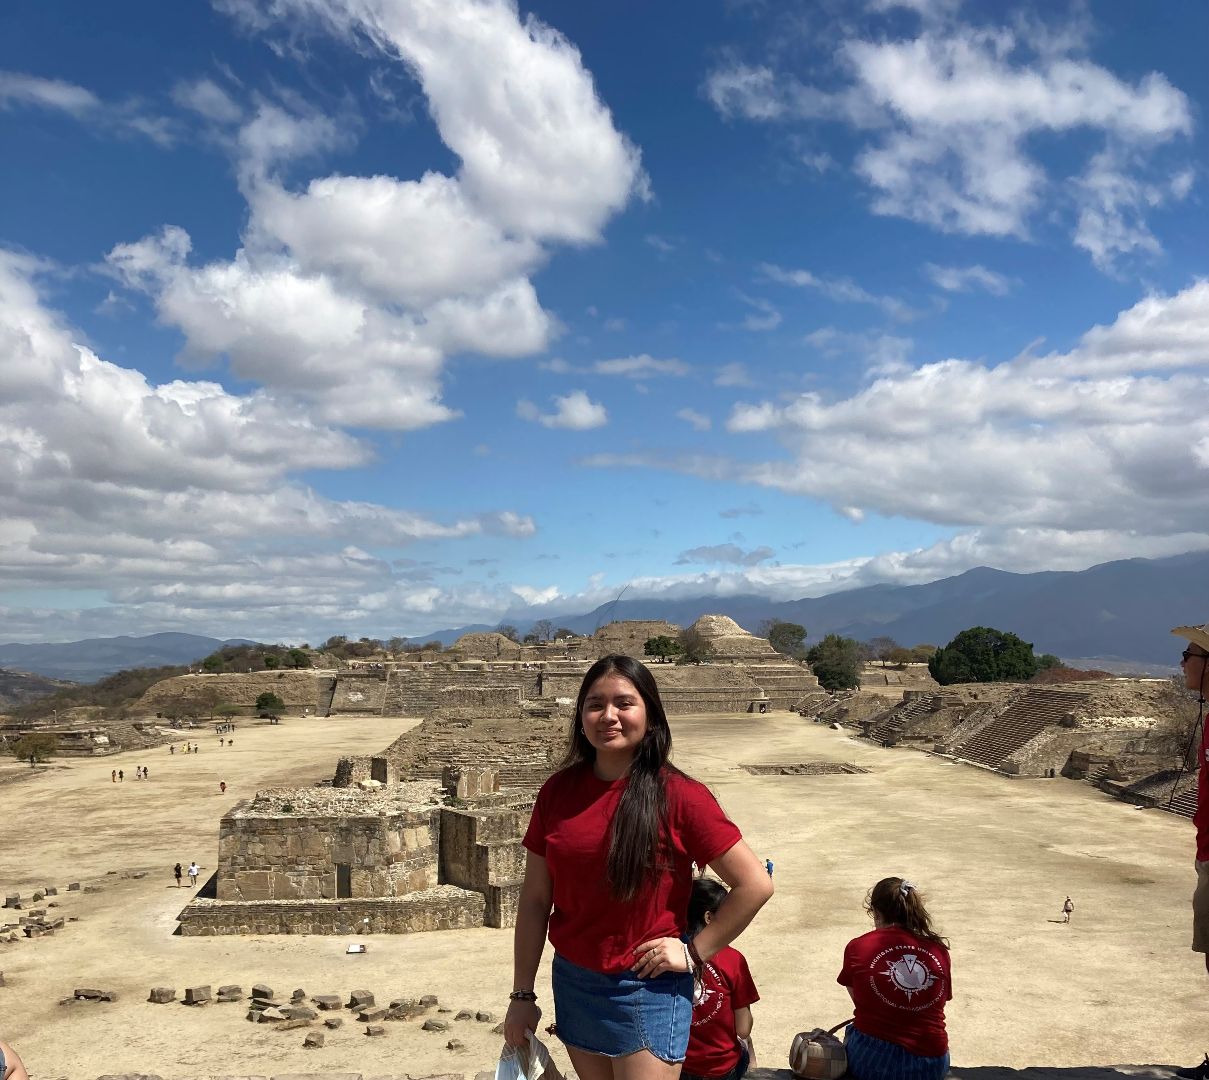 Luz standing in front of ruins in Mexico